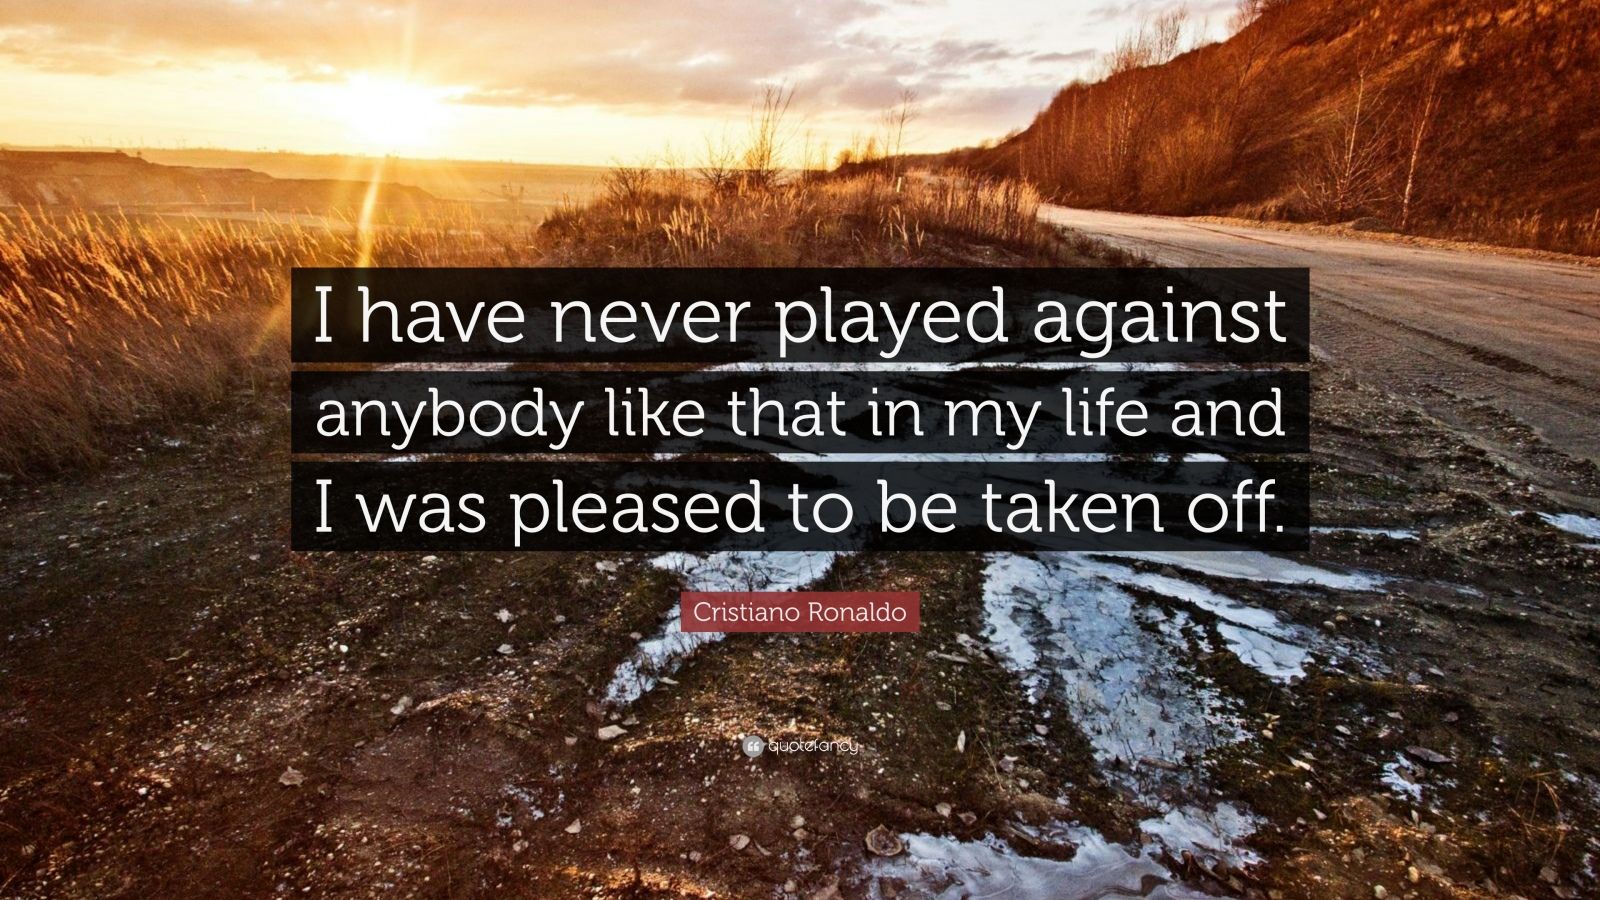 Cristiano Ronaldo Quote: "I have never played against ...